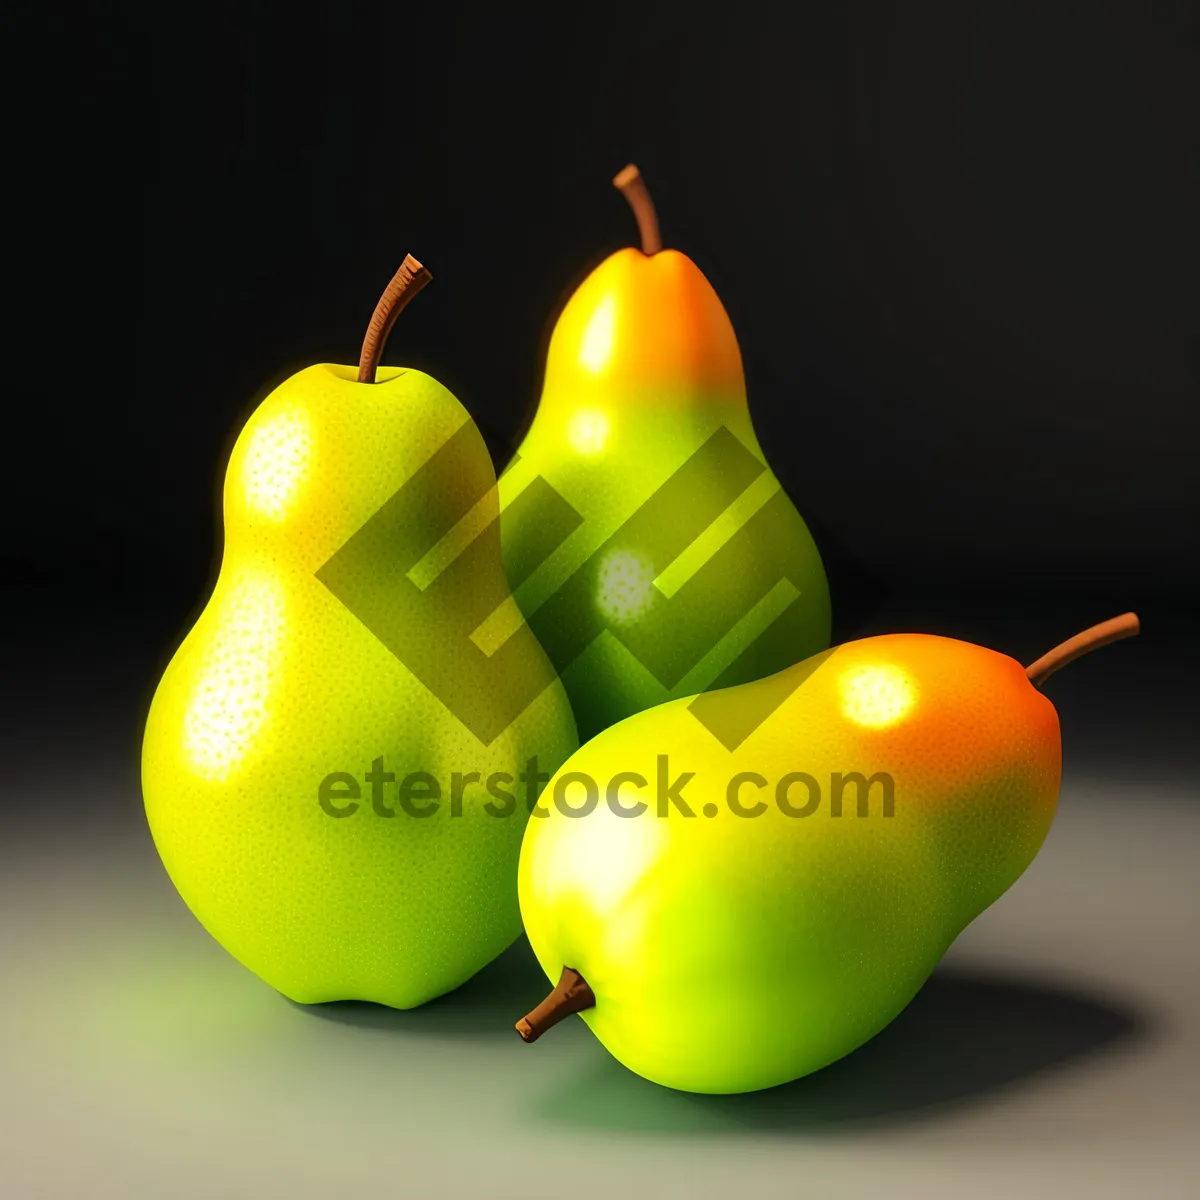 Picture of Fruit Medley: Pears and Apples, Fresh and Healthy